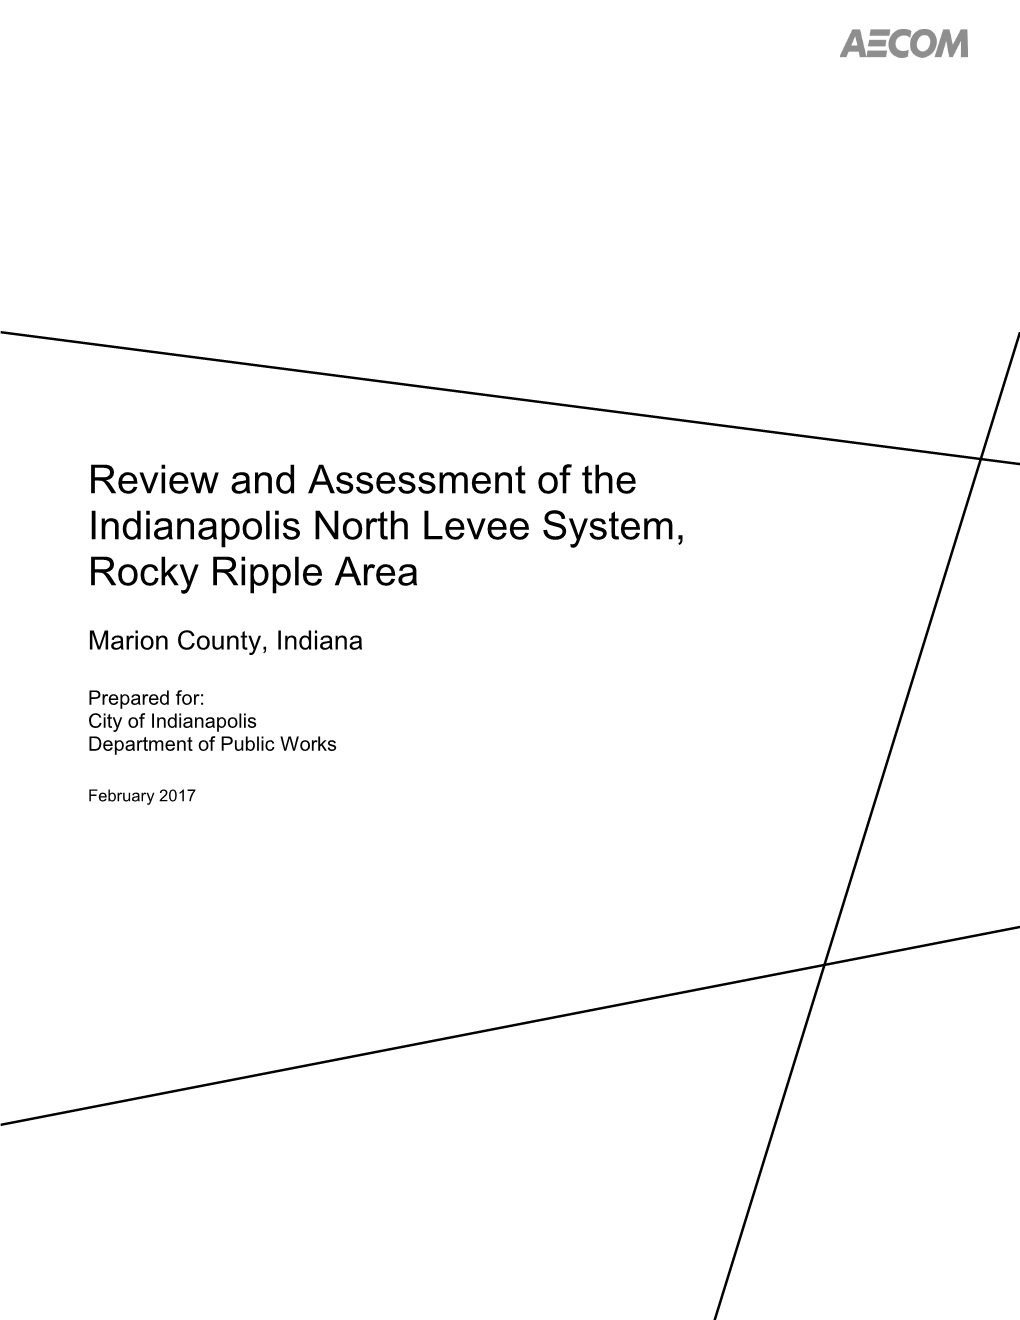 Review and Assessment of the Indianapolis North Levee System, Rocky Ripple Area